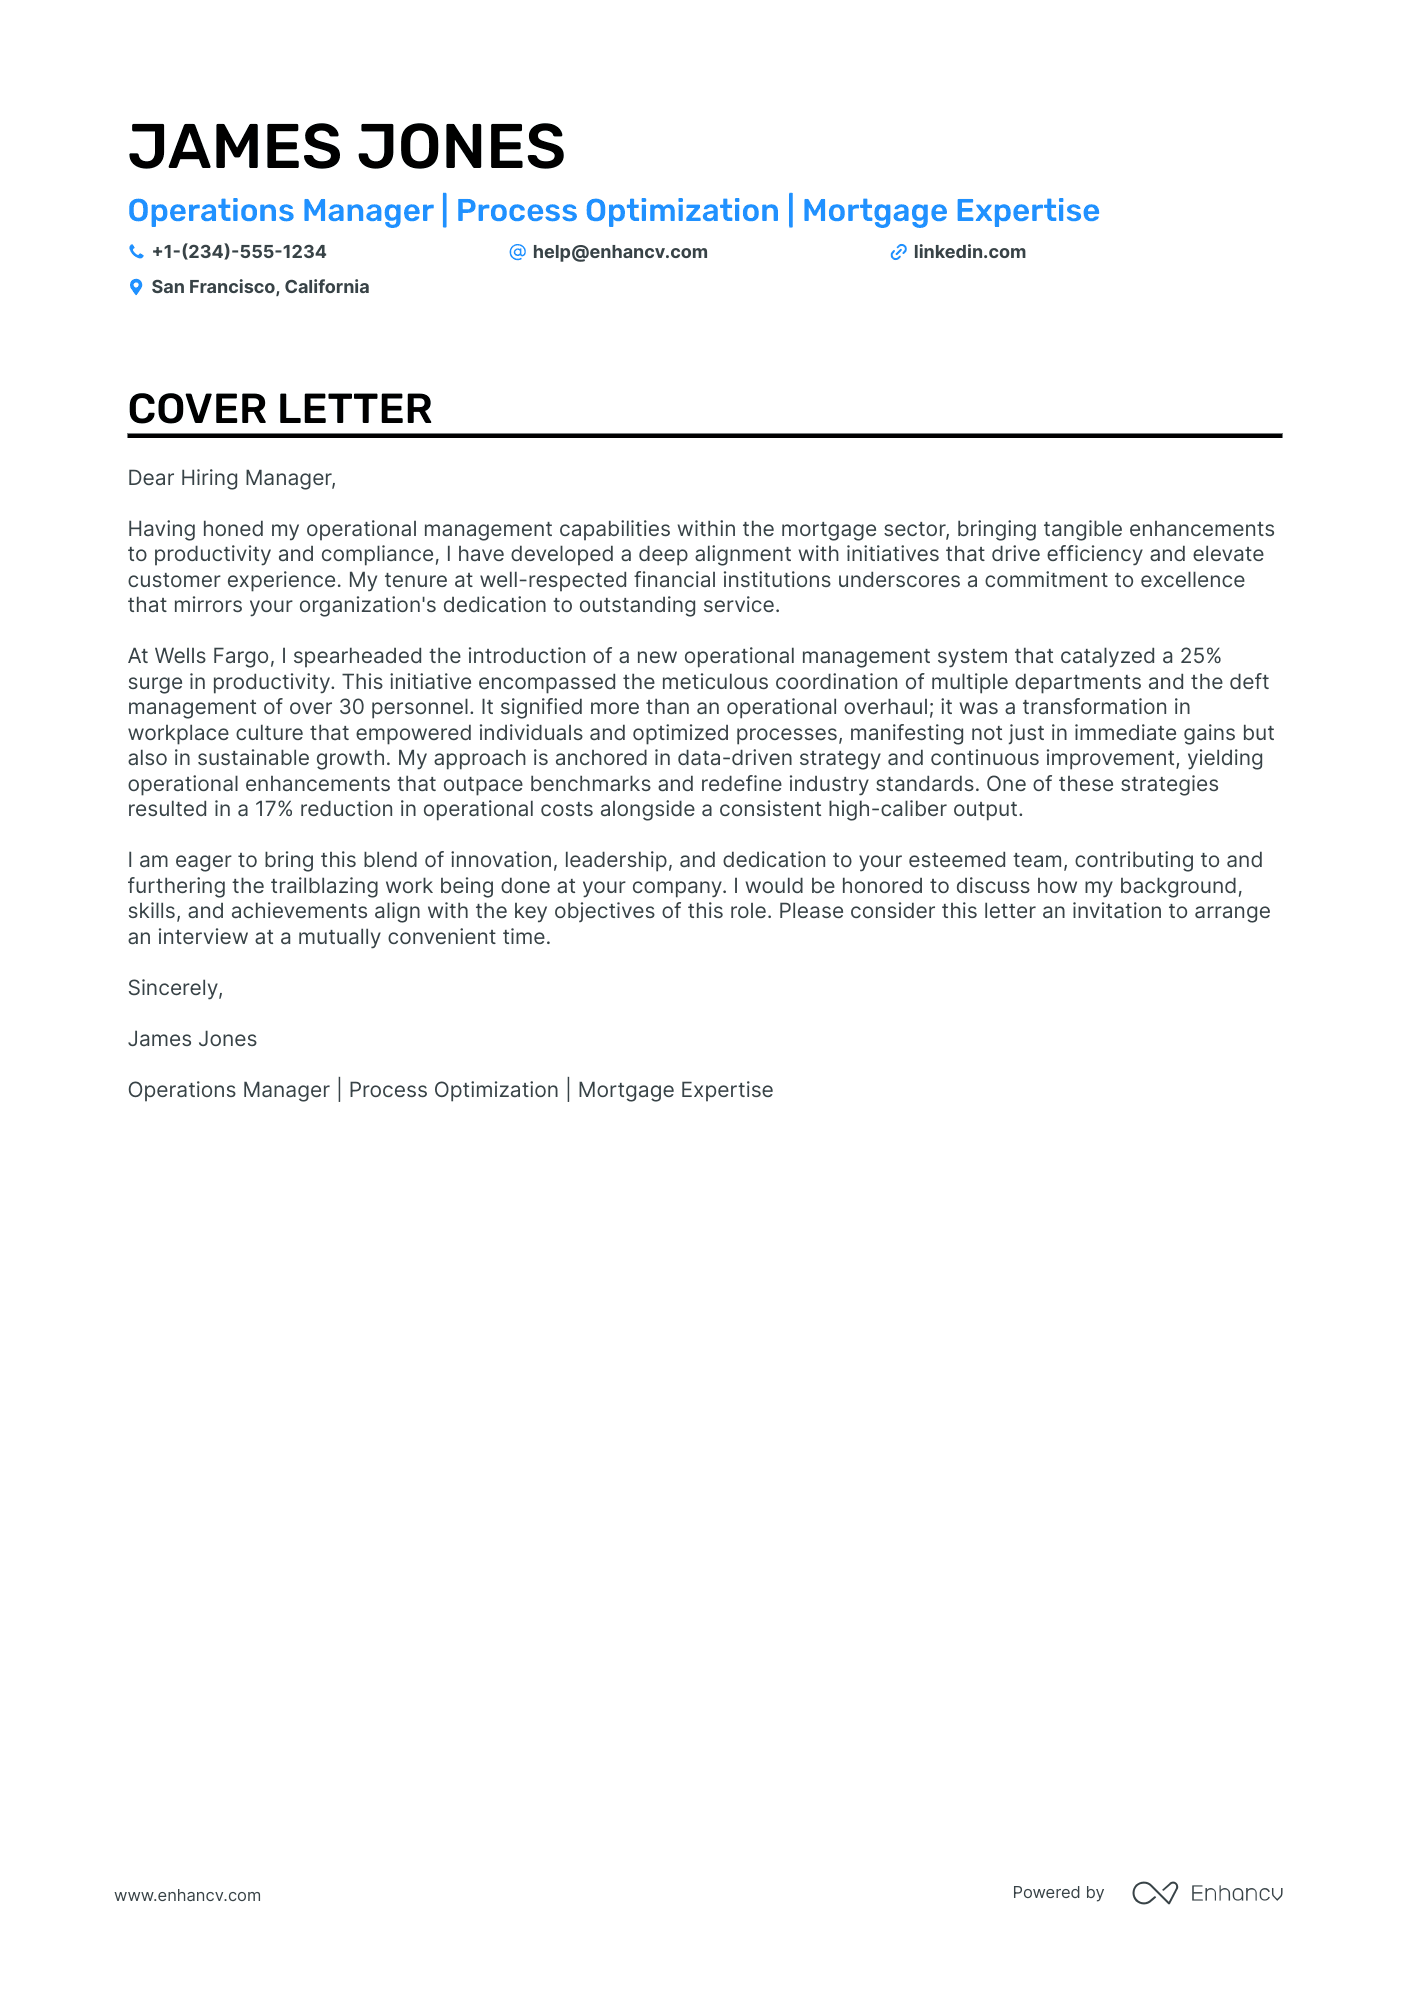 sample cover letter for operations manager position